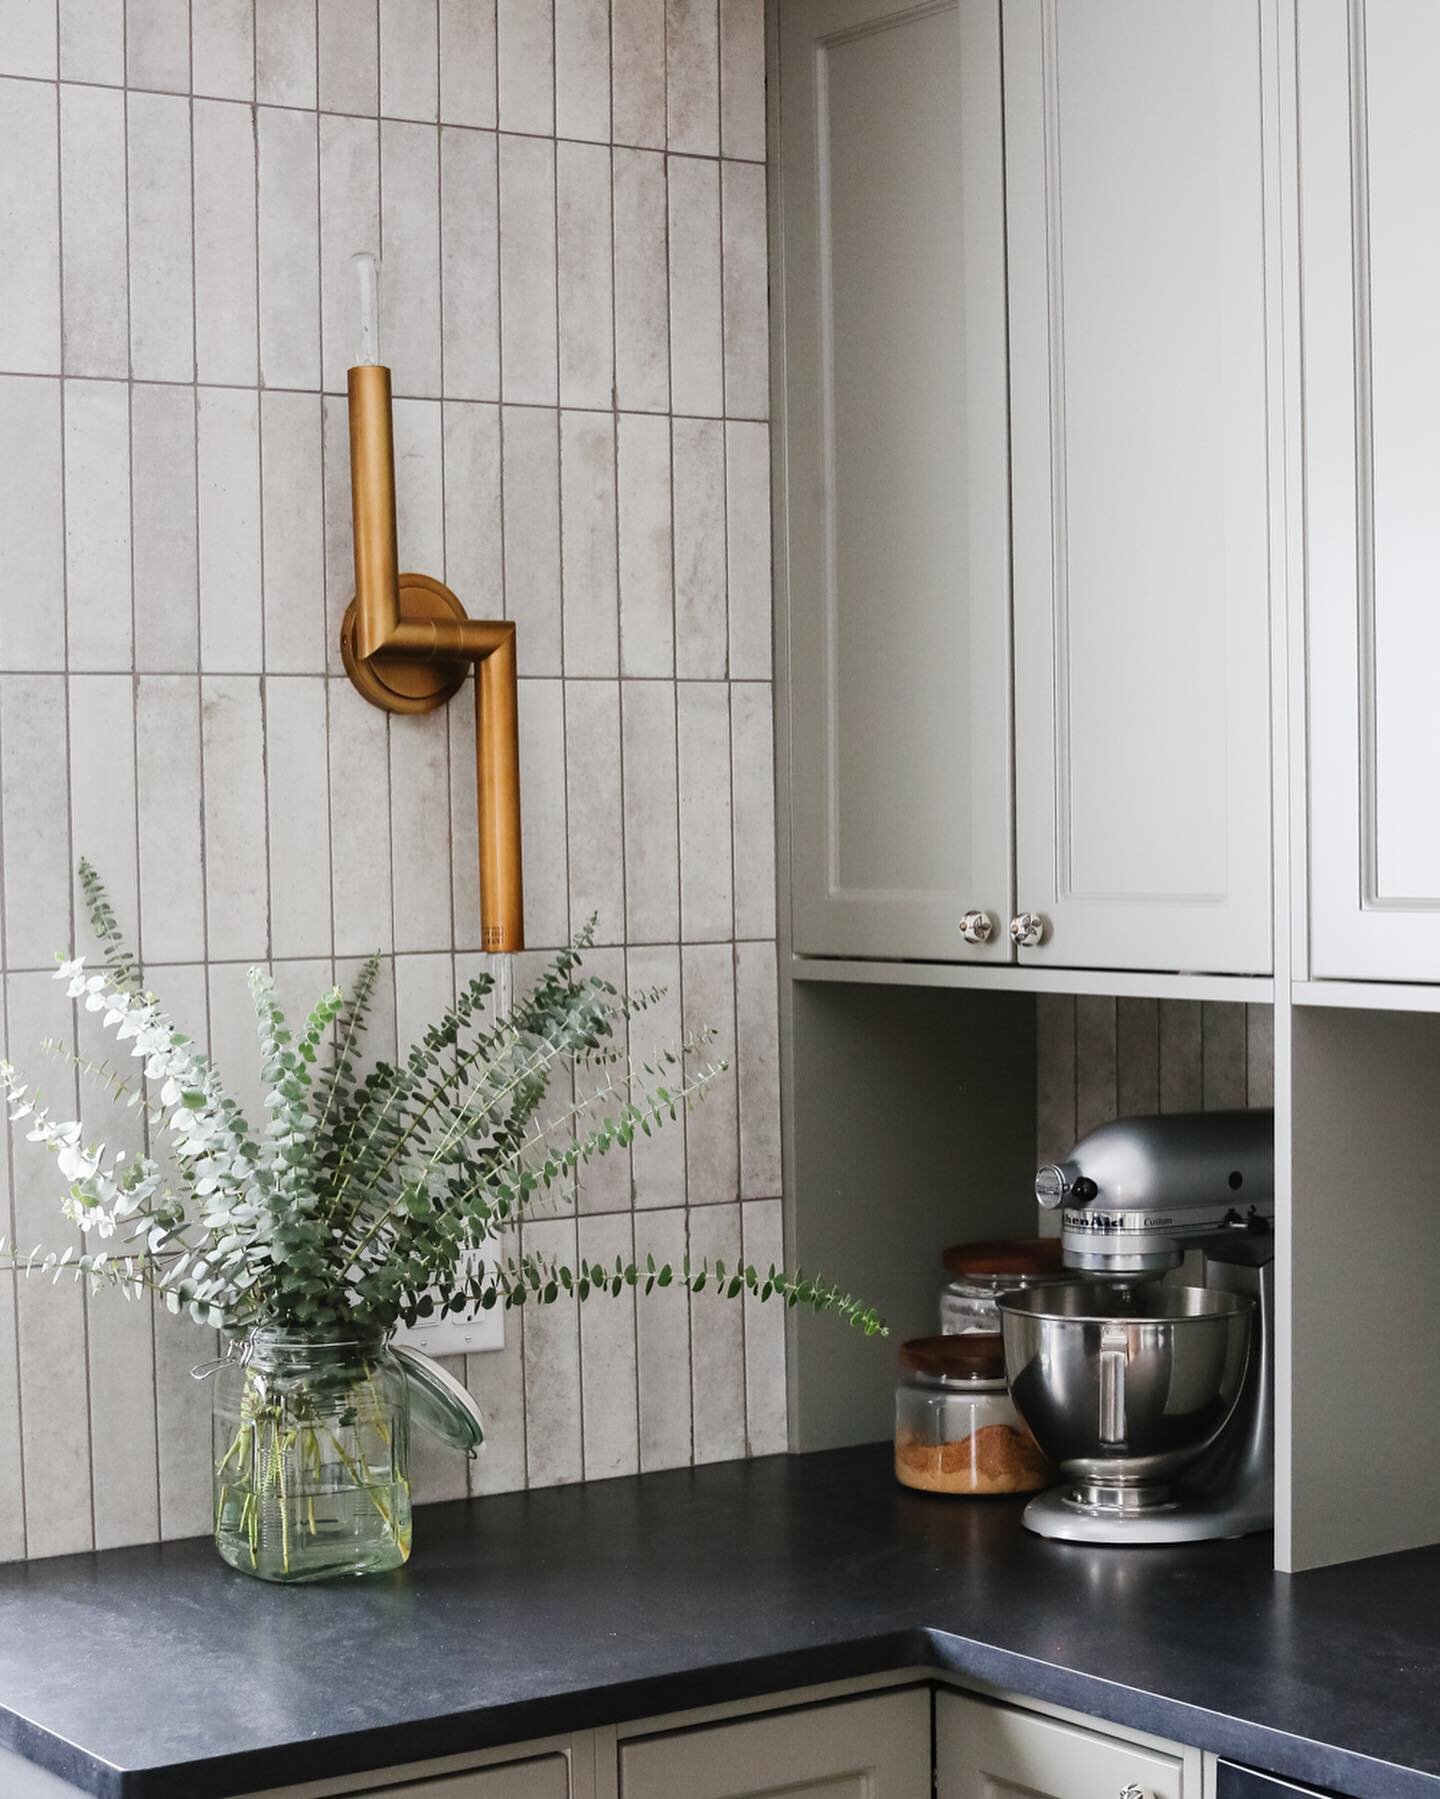 We are featured on @elledecor! 
The backsplash tile from our #FDmidcenturyfarmhouse project was included as an idea for the &lsquo;ultimate accent wall&rsquo; {more in stories}. 

Thank you for including us + for the lovely write up @rachelesilva_ 🖤